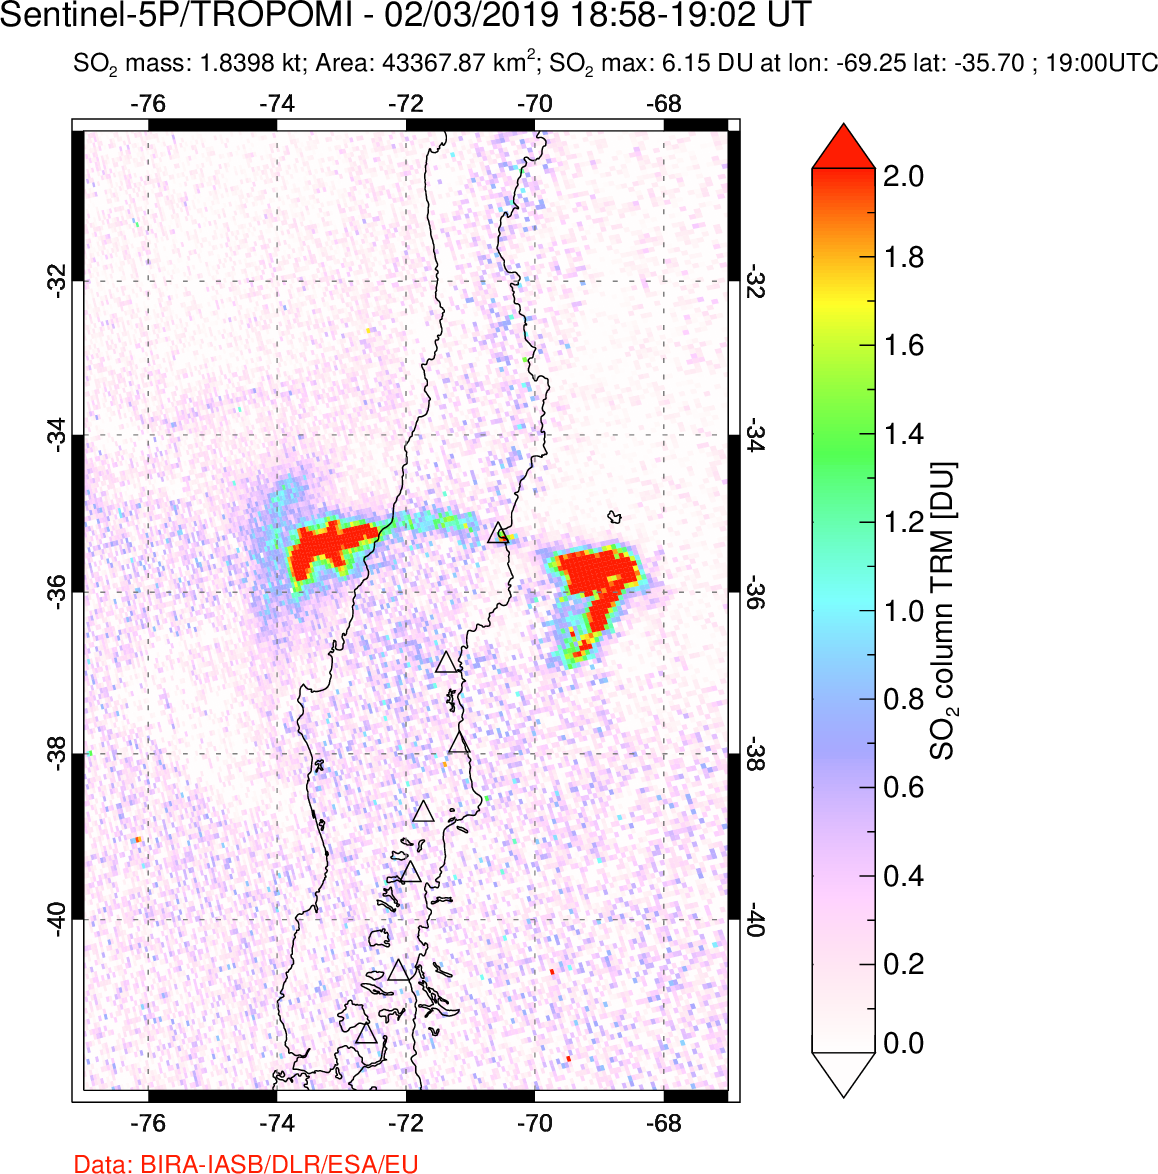 A sulfur dioxide image over Central Chile on Feb 03, 2019.